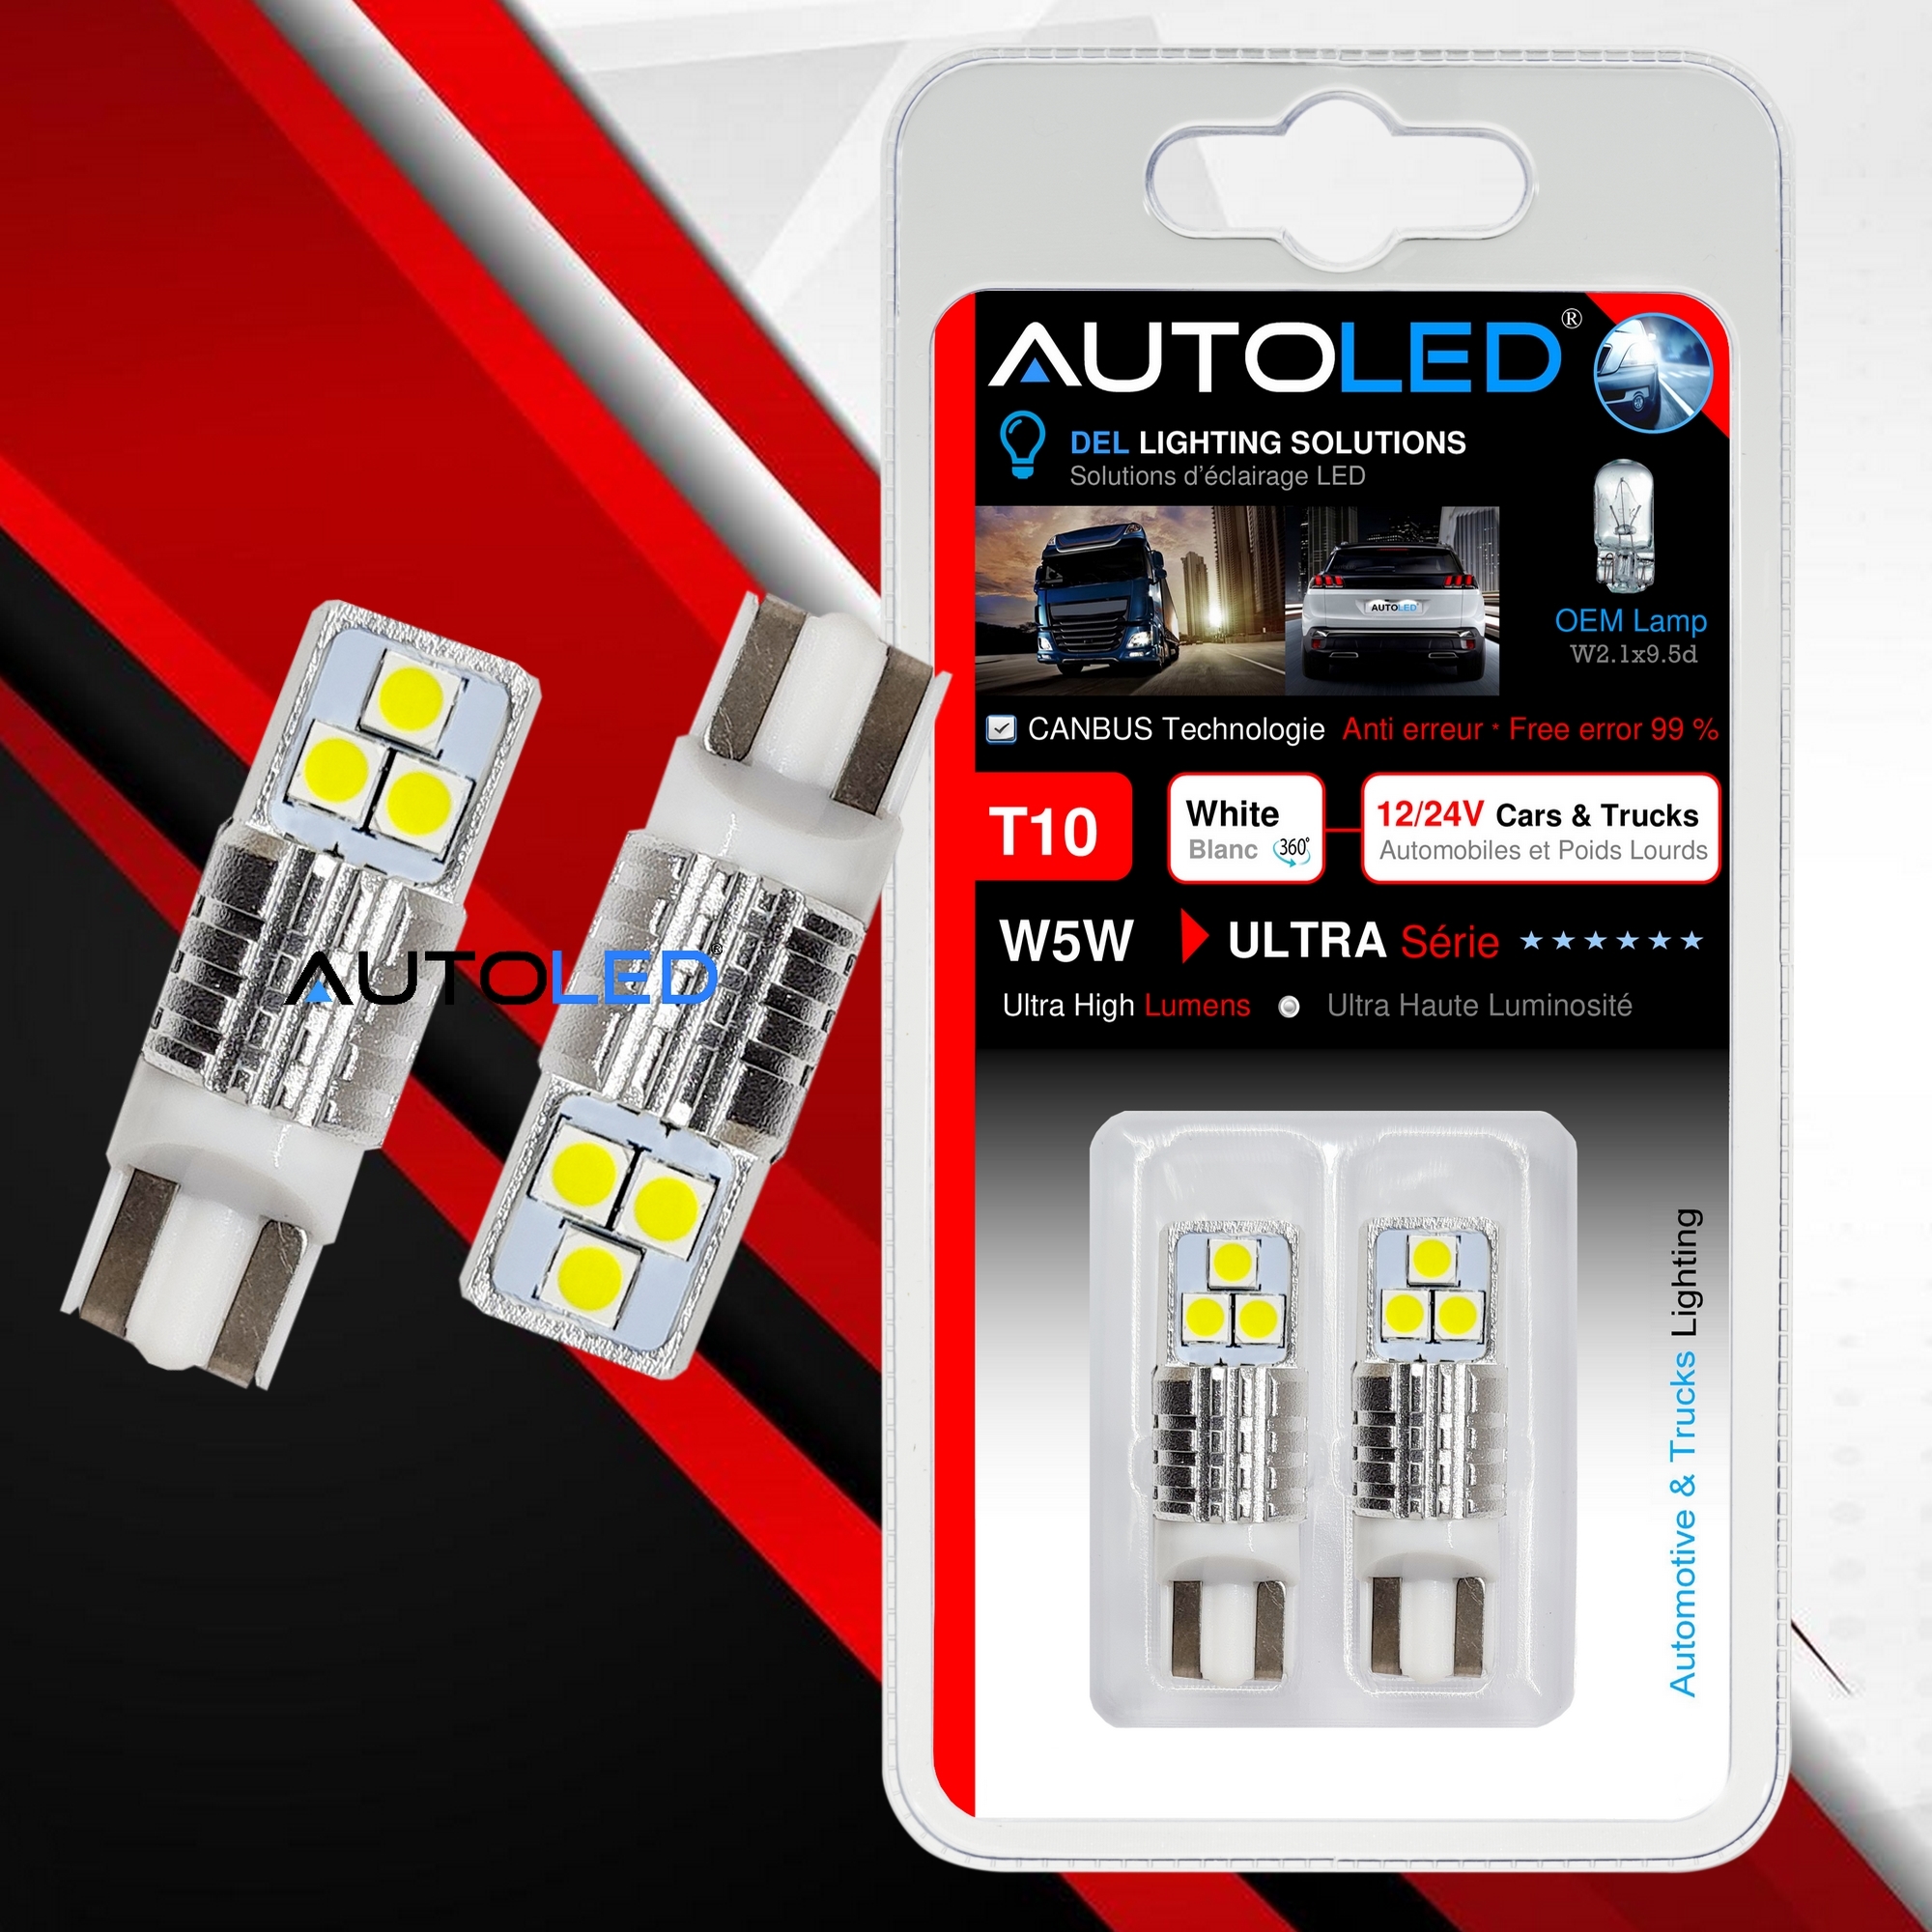 Ampoule led T10 W5W 20 leds blanches anti-erreur canbus - Led-effect